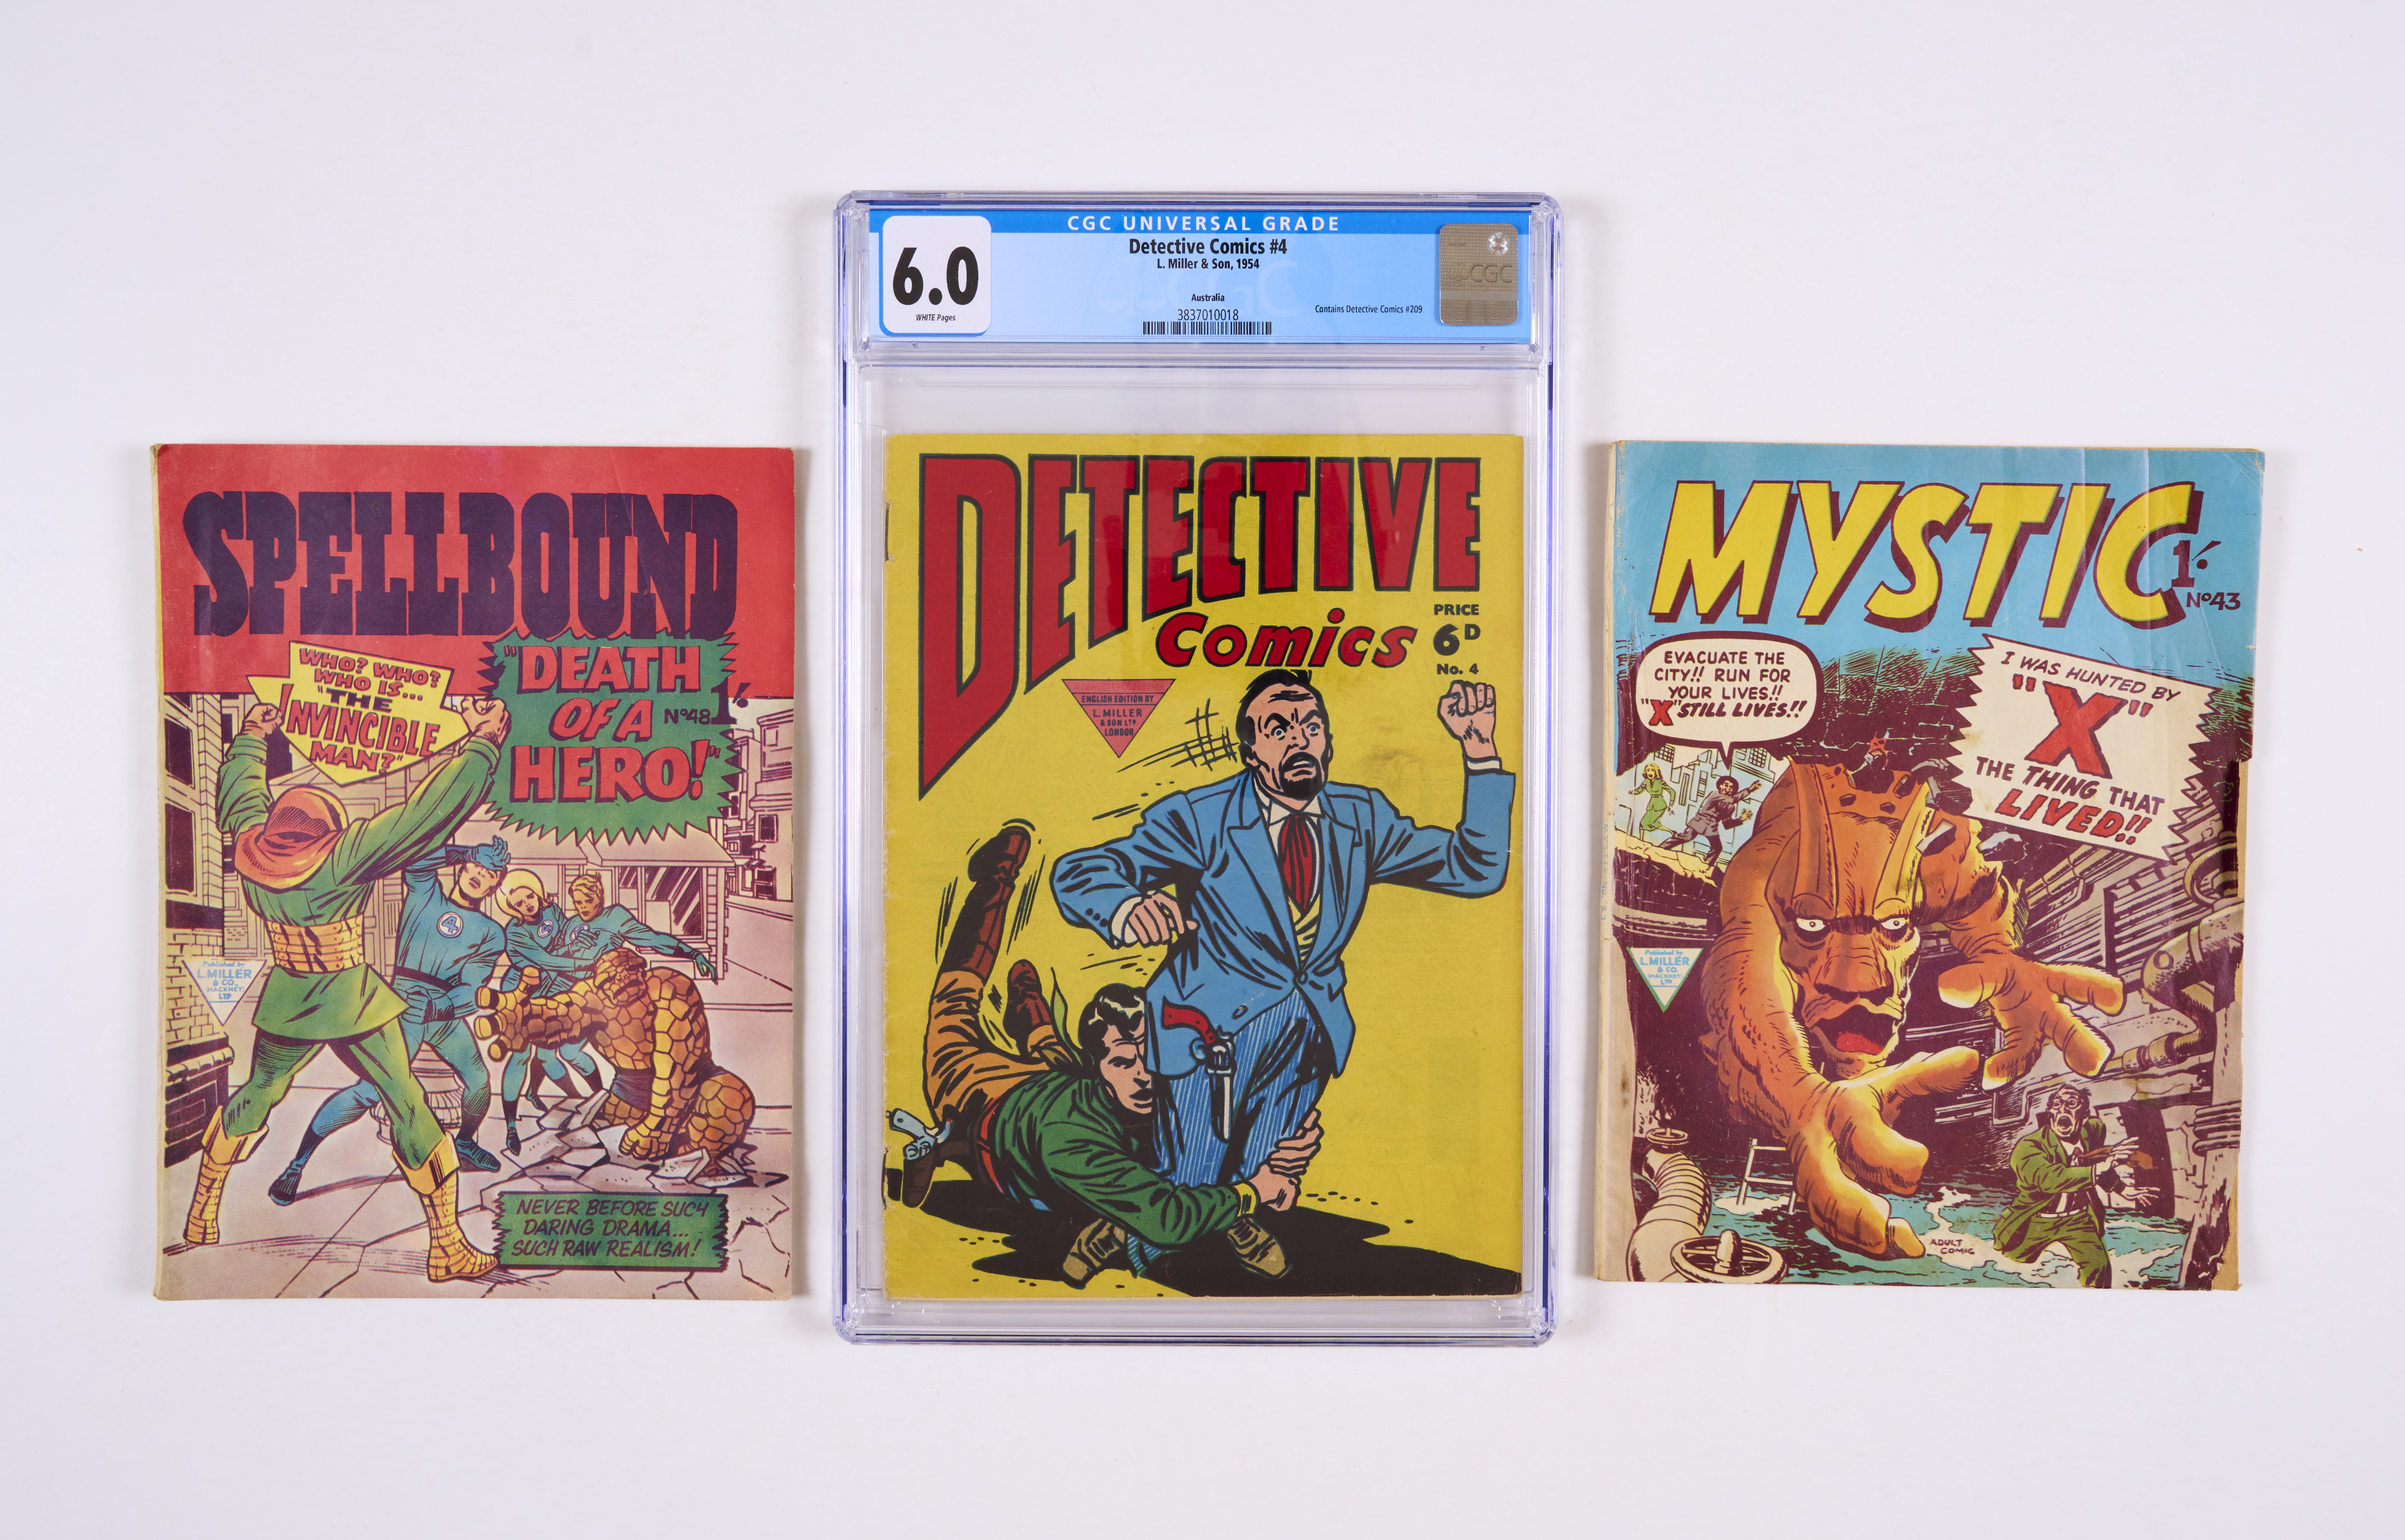 Detective 4 (L. Miller 1950s) CGC 6.0. With Mystic 43 [vg], and Spellbound 48 (F. Four cover) [